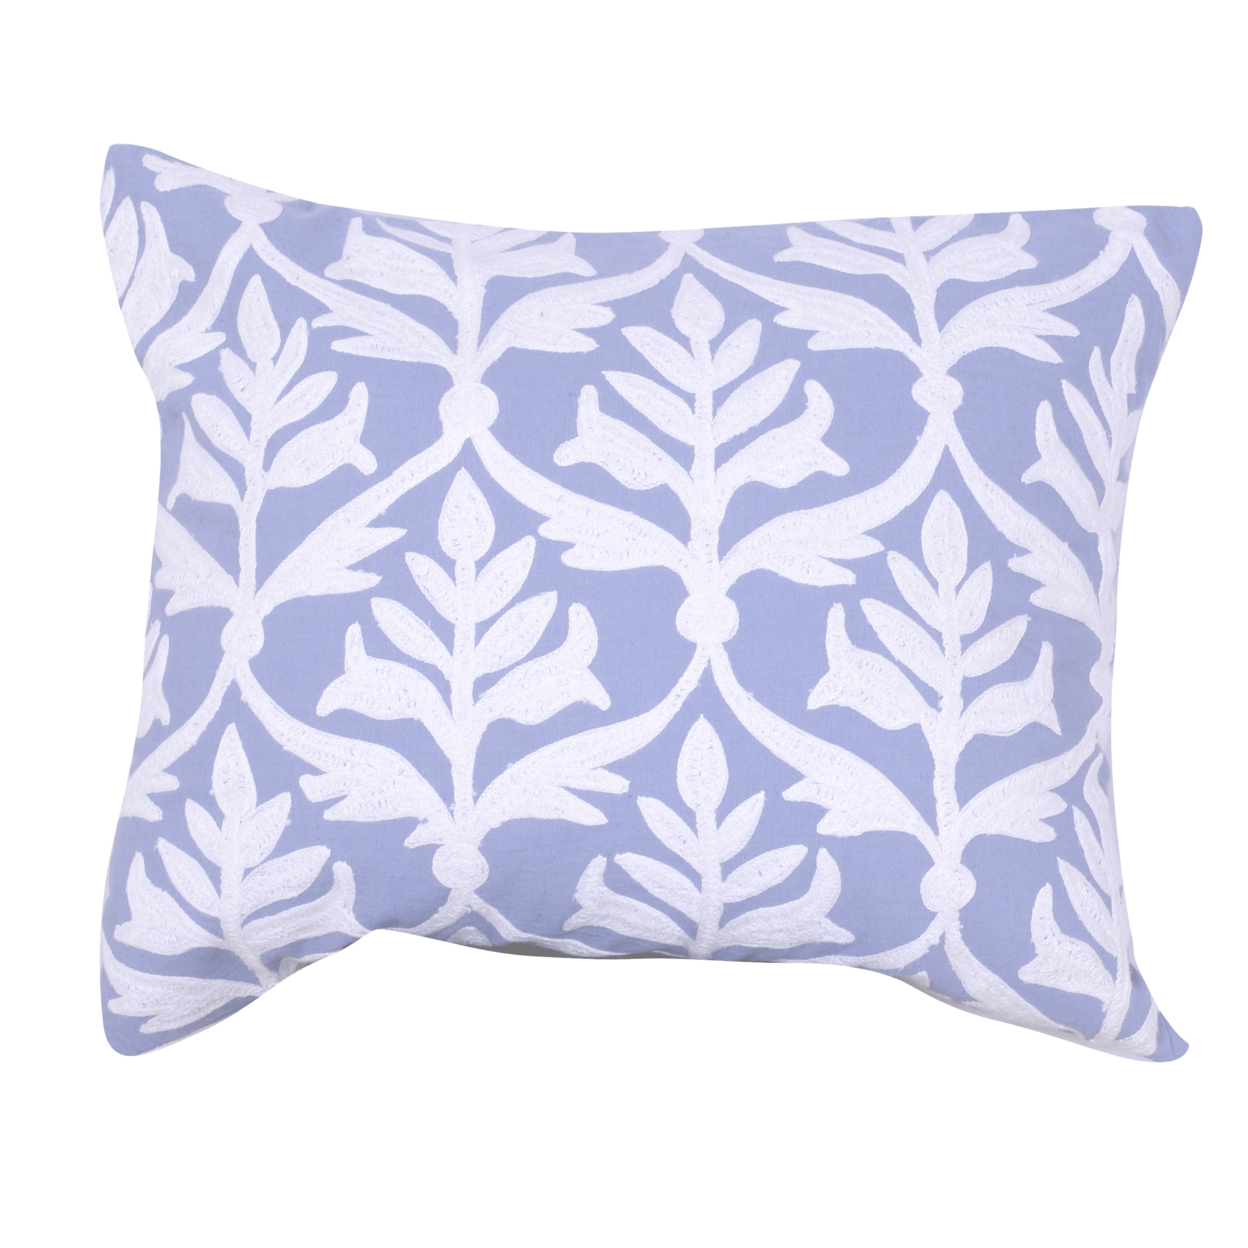 20 X 16 Inch Cotton Pillow With Leaf Motif Embroidery, Set Of 2, White And Blue- Saltoro Sherpi